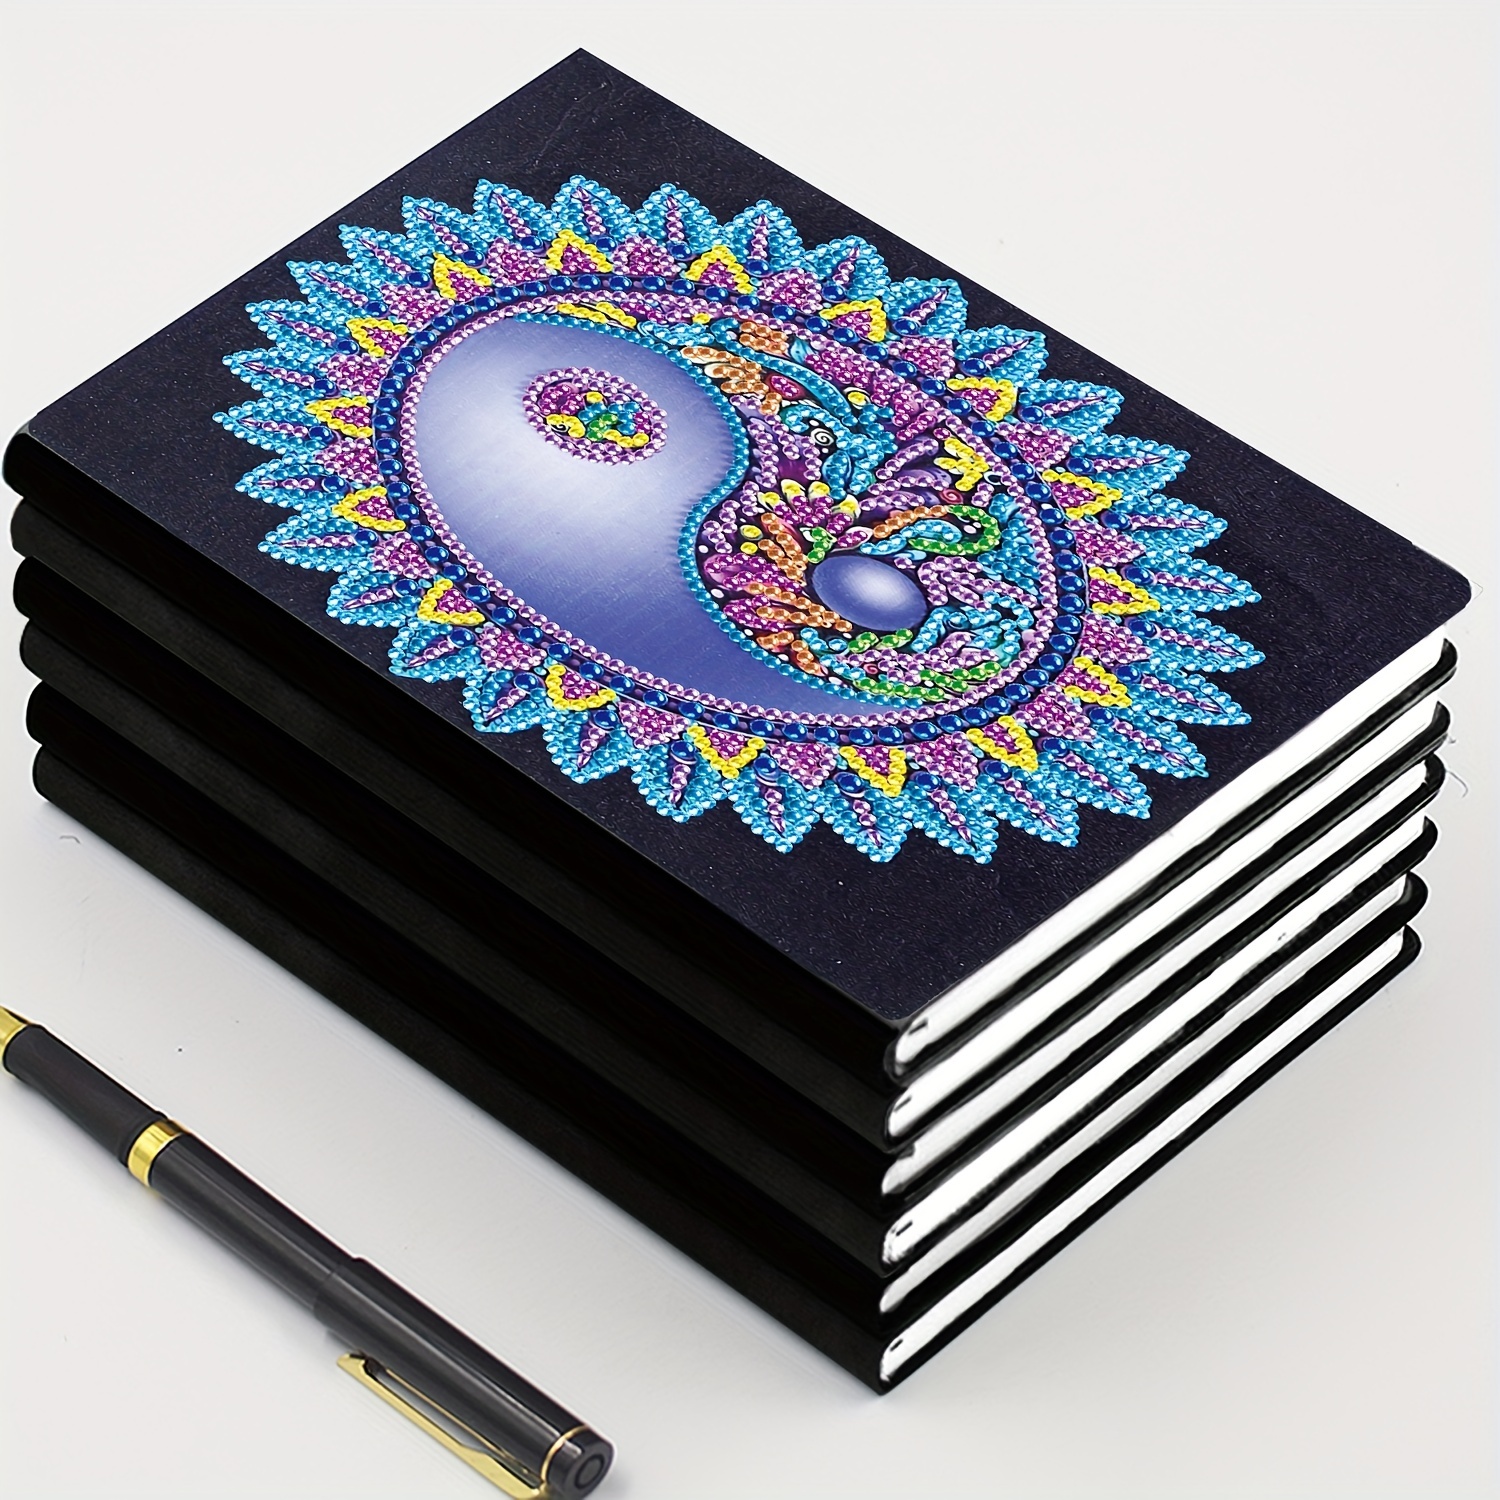 Diamond Painting Journal - Notebook for 50 Diamond Painting Projects - DAC  Version: special for Diamond Art Club projects